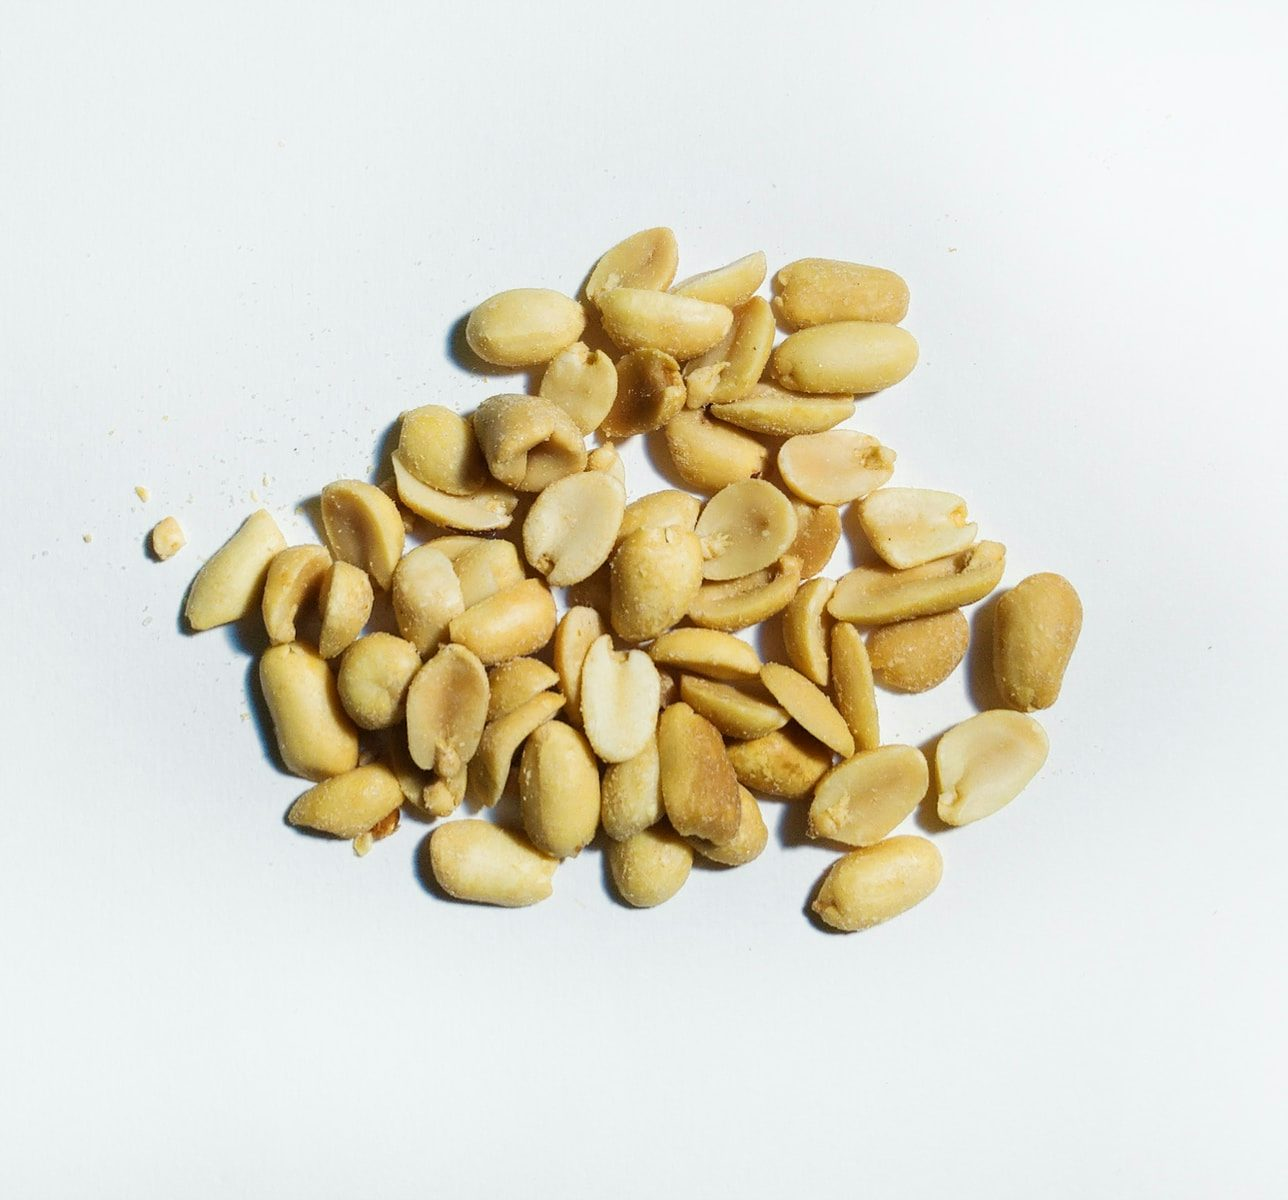 Peanuts packing